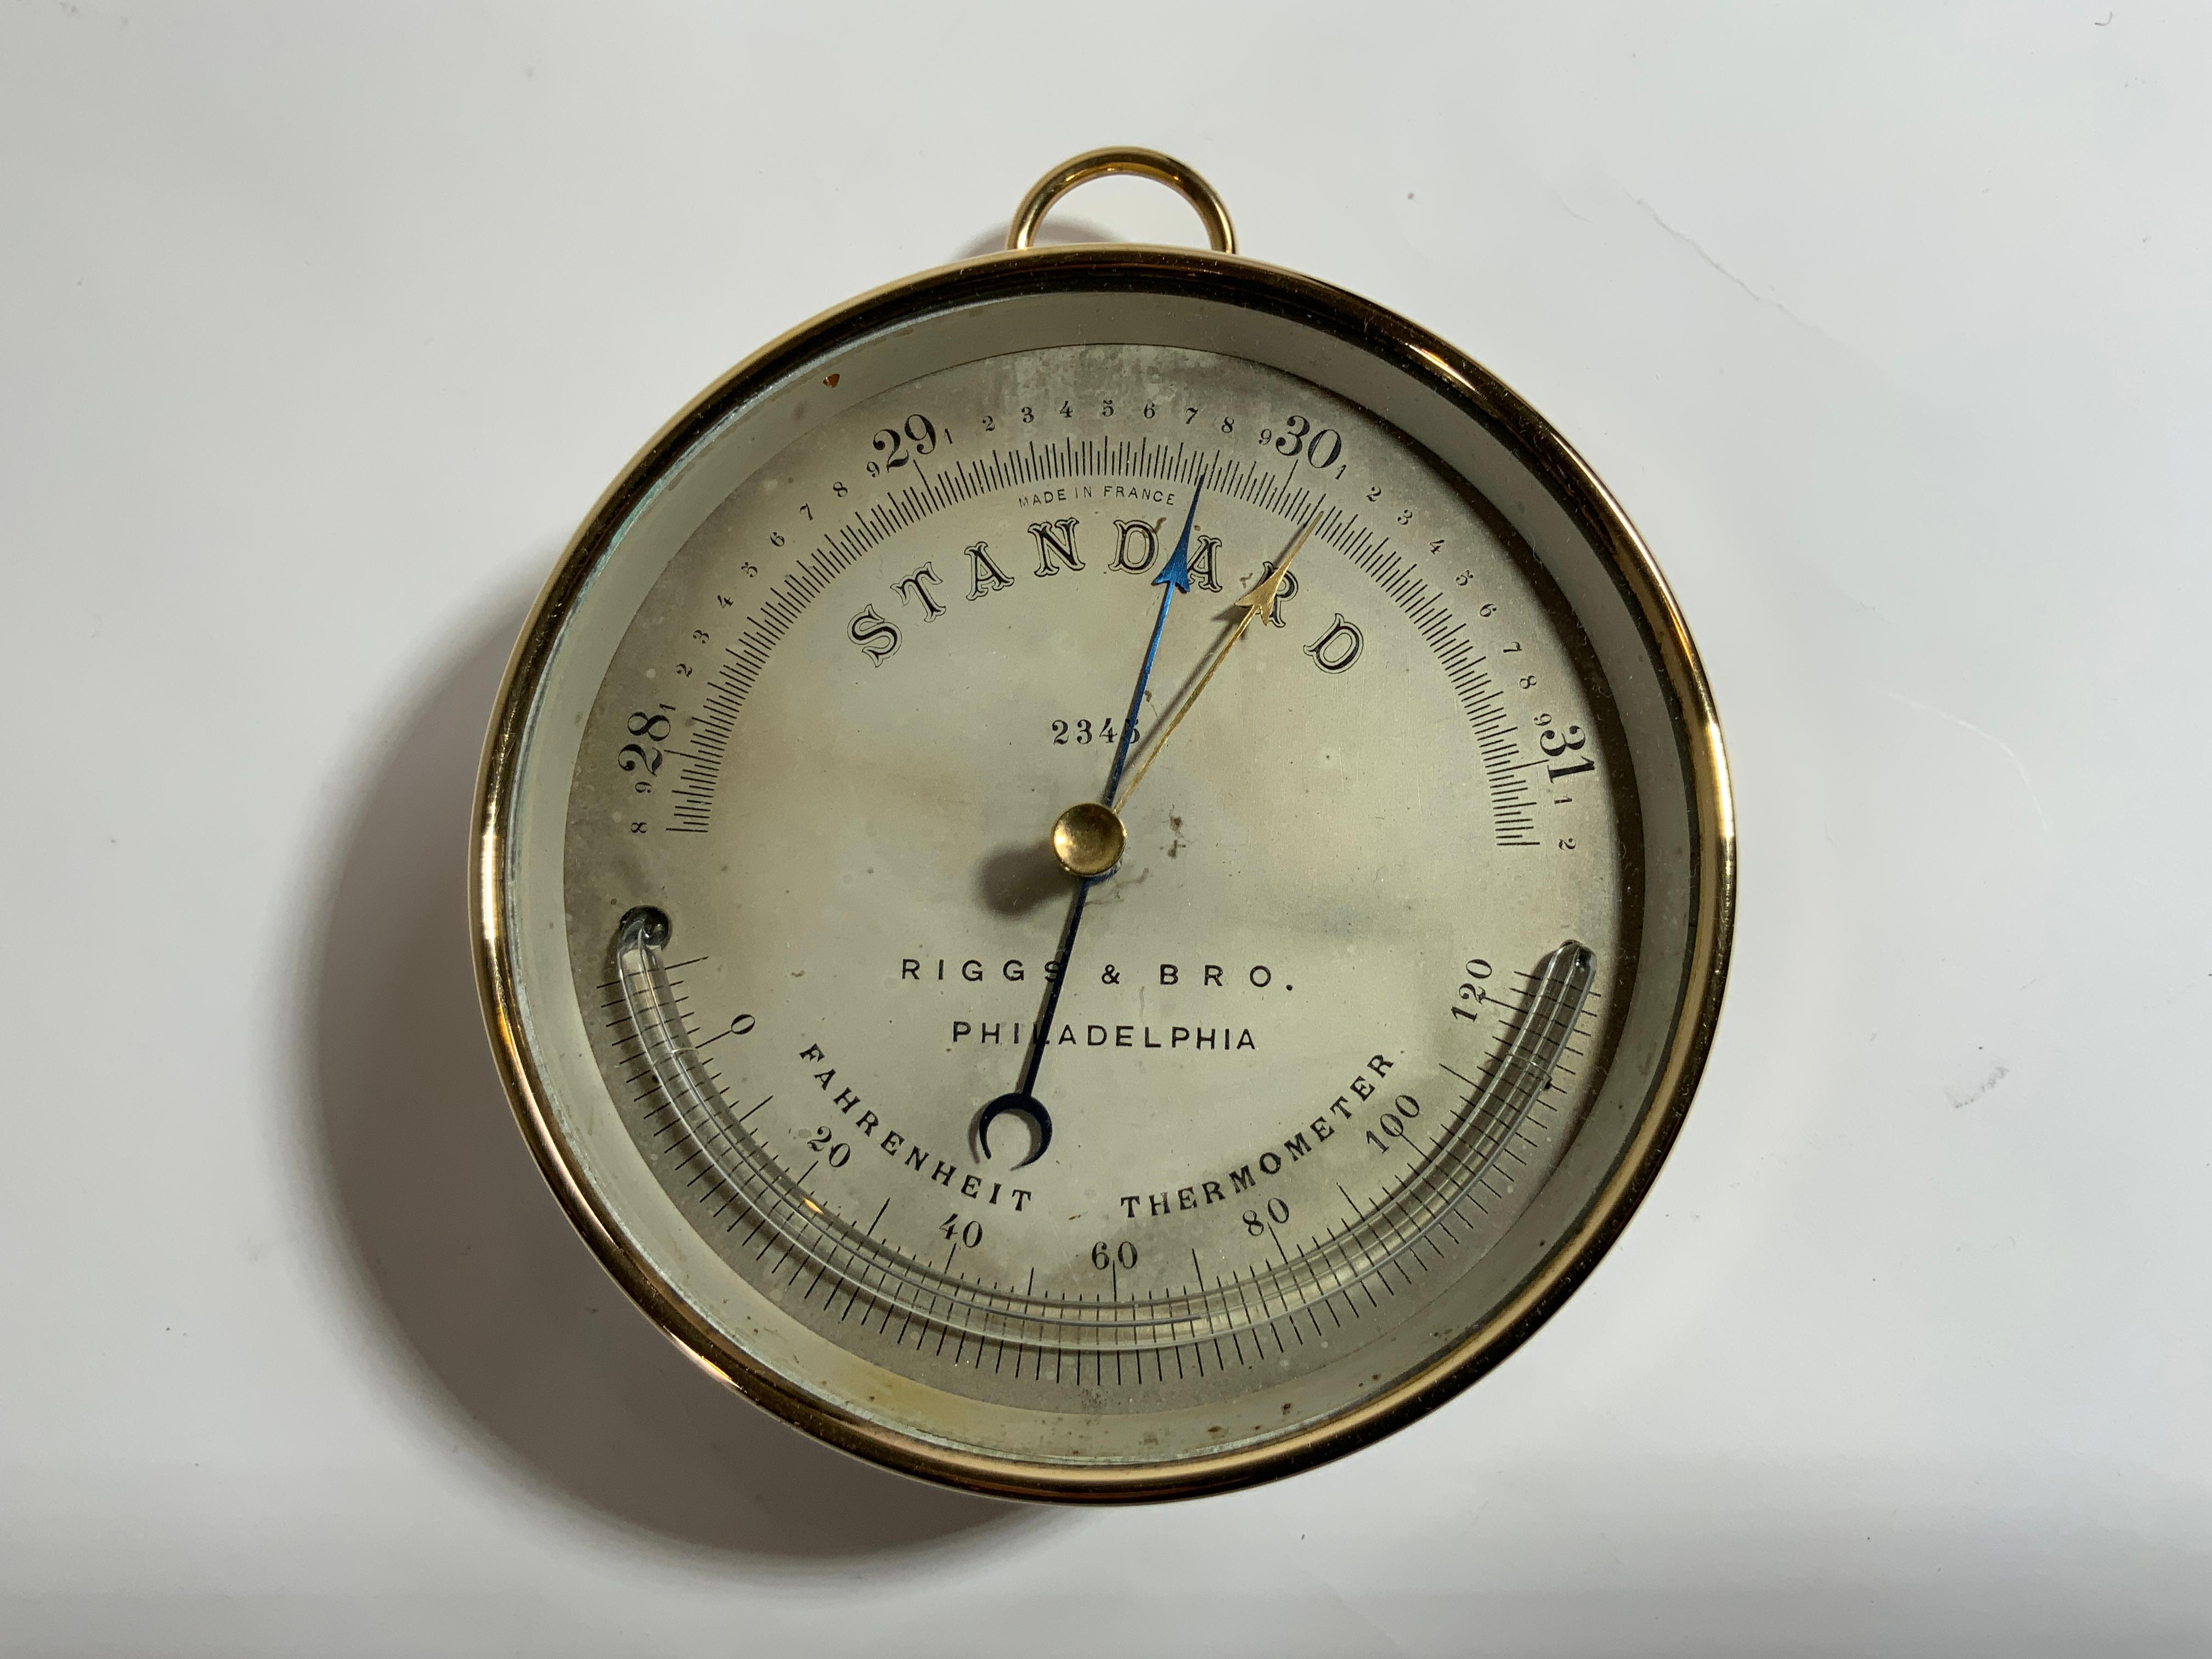 Solid brass French made barometer by Riggs and Brother of Philadelphia. With Fahrenheit thermometer. With hanging ring and screw flange. Adjustment hole on rear. Circa 1900.

Overall Dimensions: 2